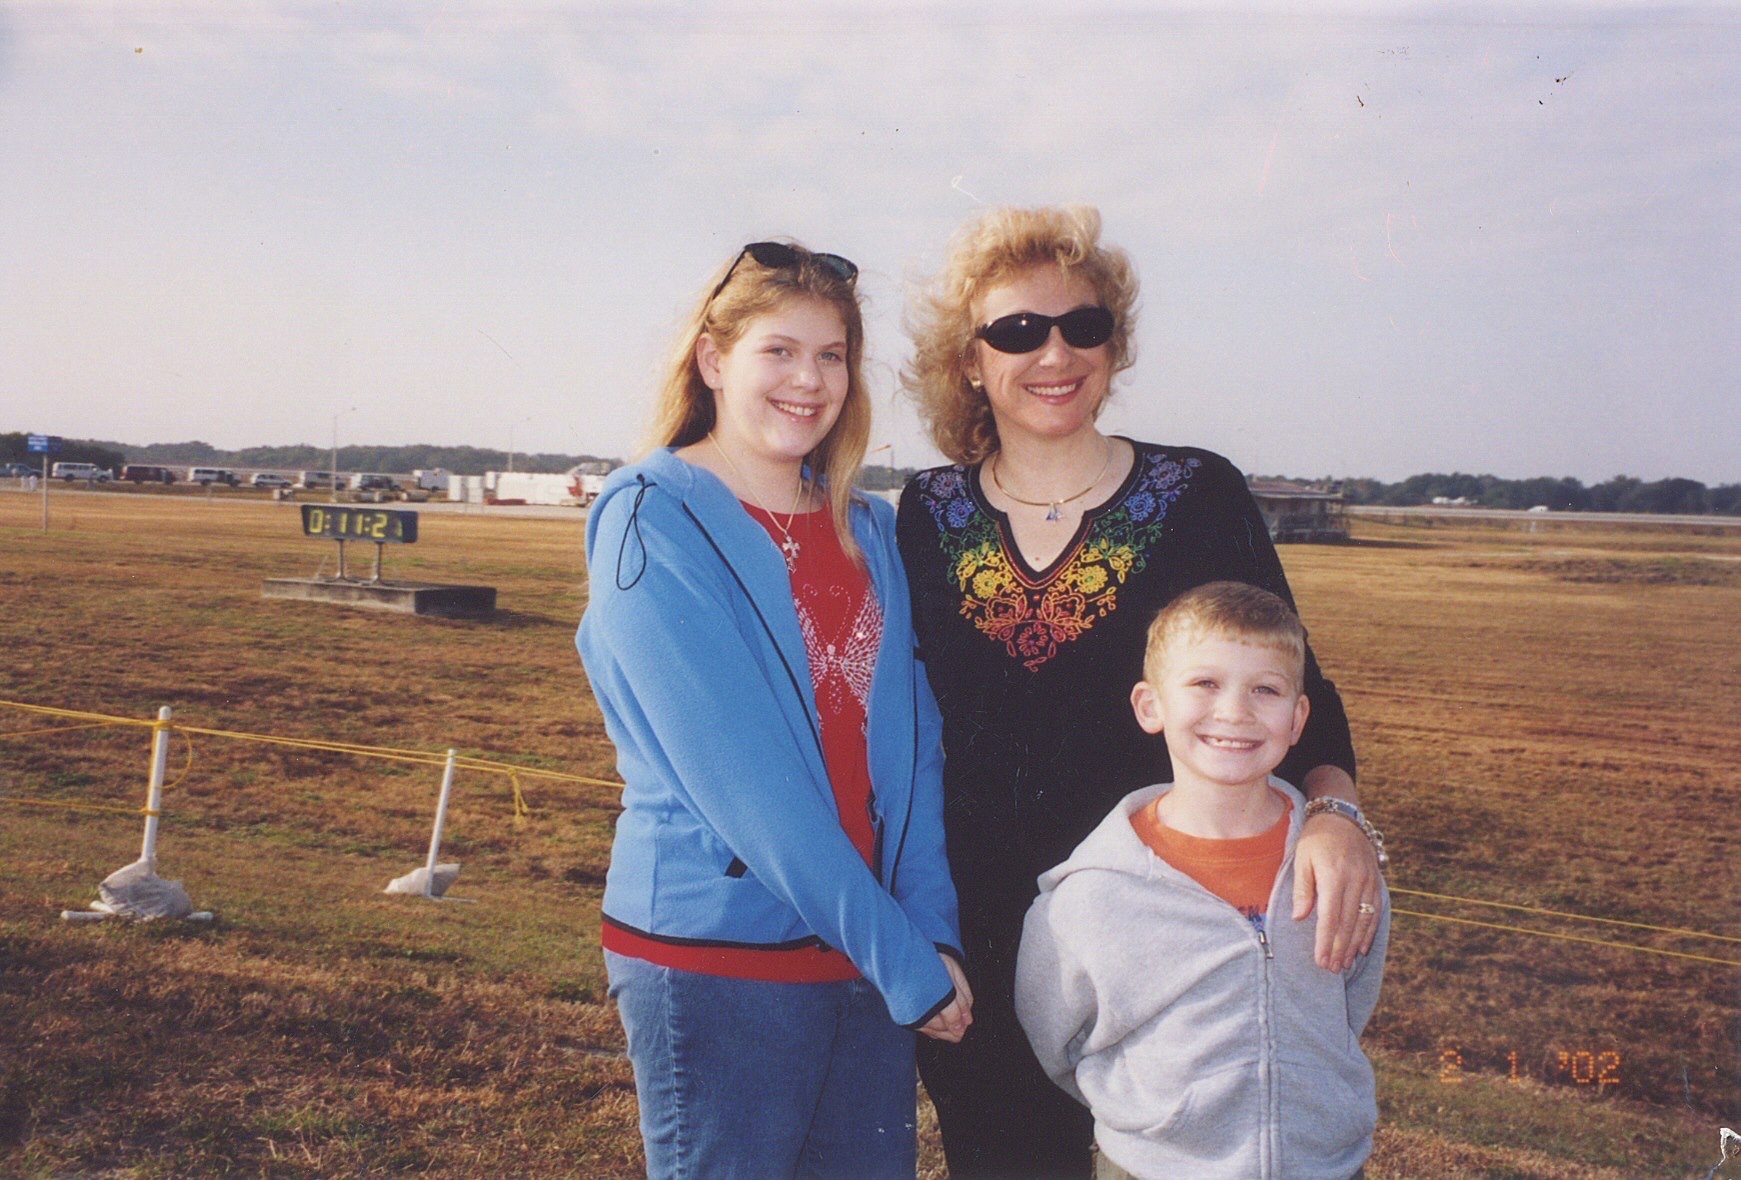 Waiting near the runway for the landing with countdown clock in background on February 1, 2003. Unbeknownst to them the Columbia has already fallen apart.